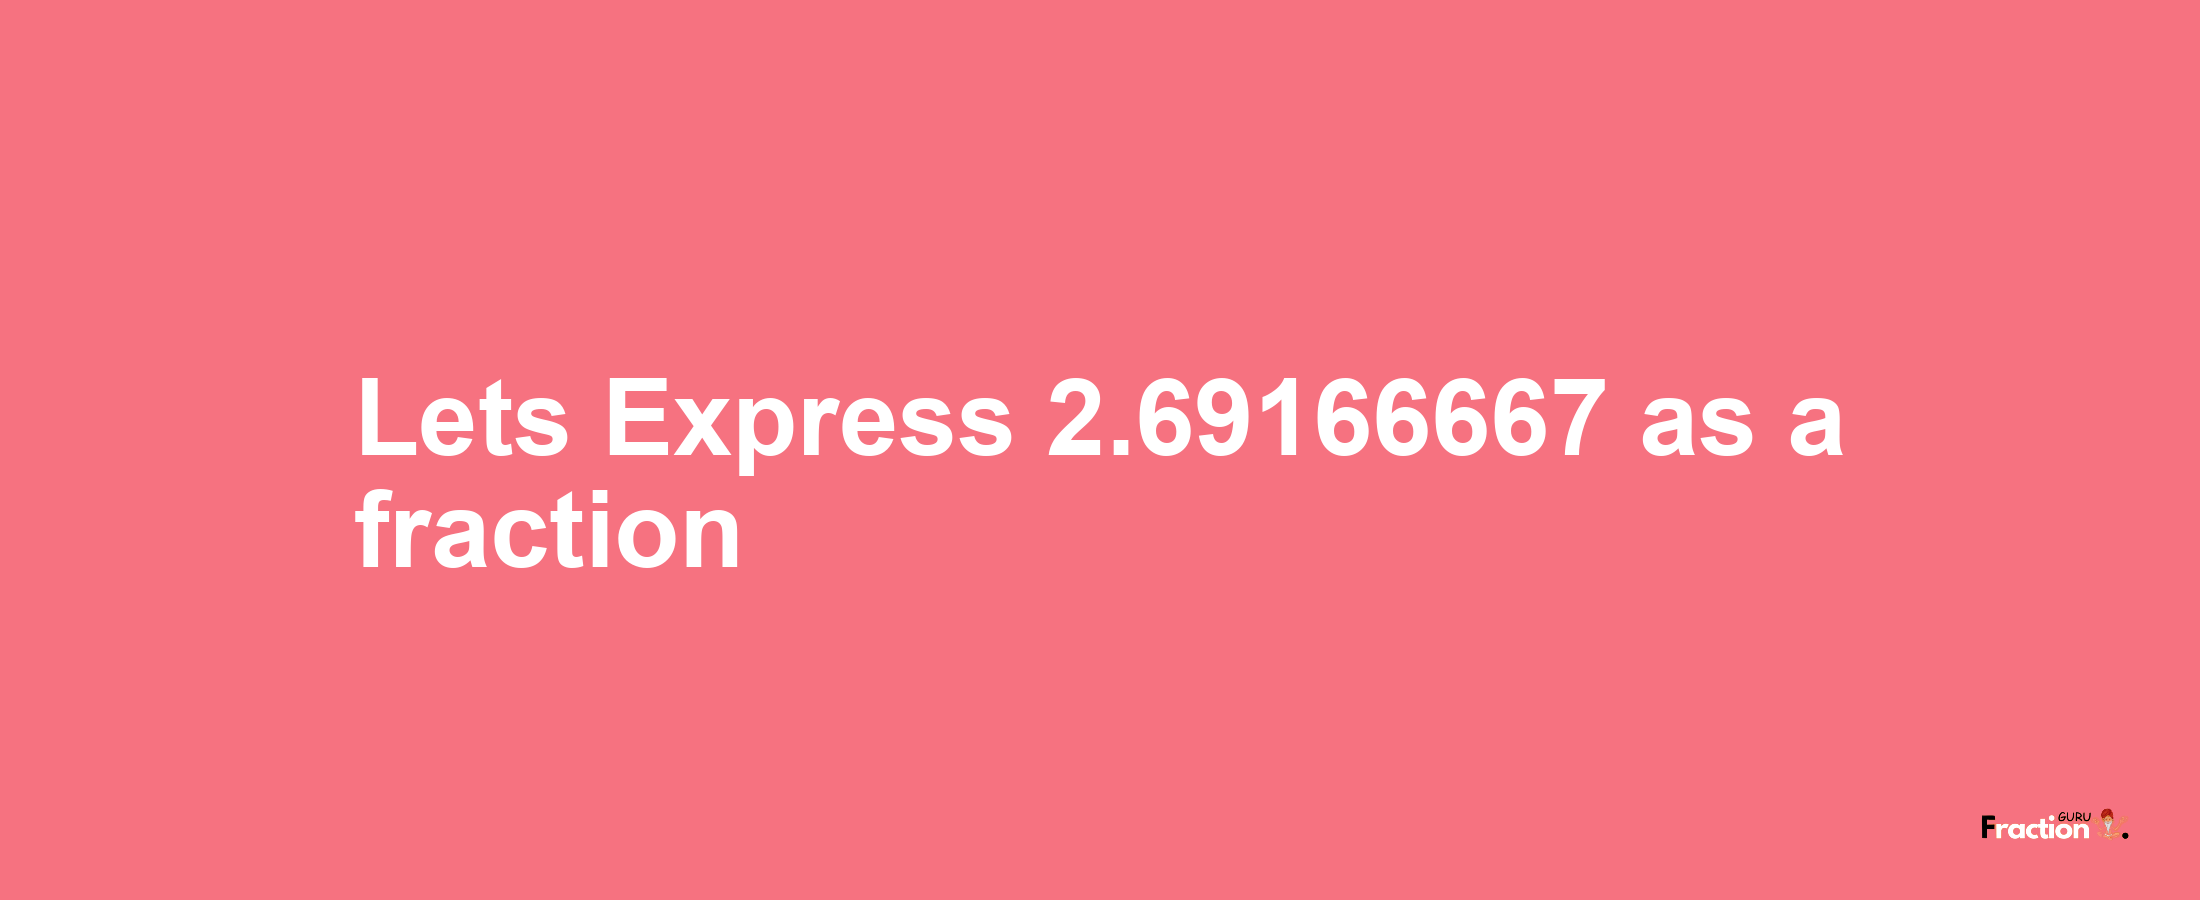 Lets Express 2.69166667 as afraction